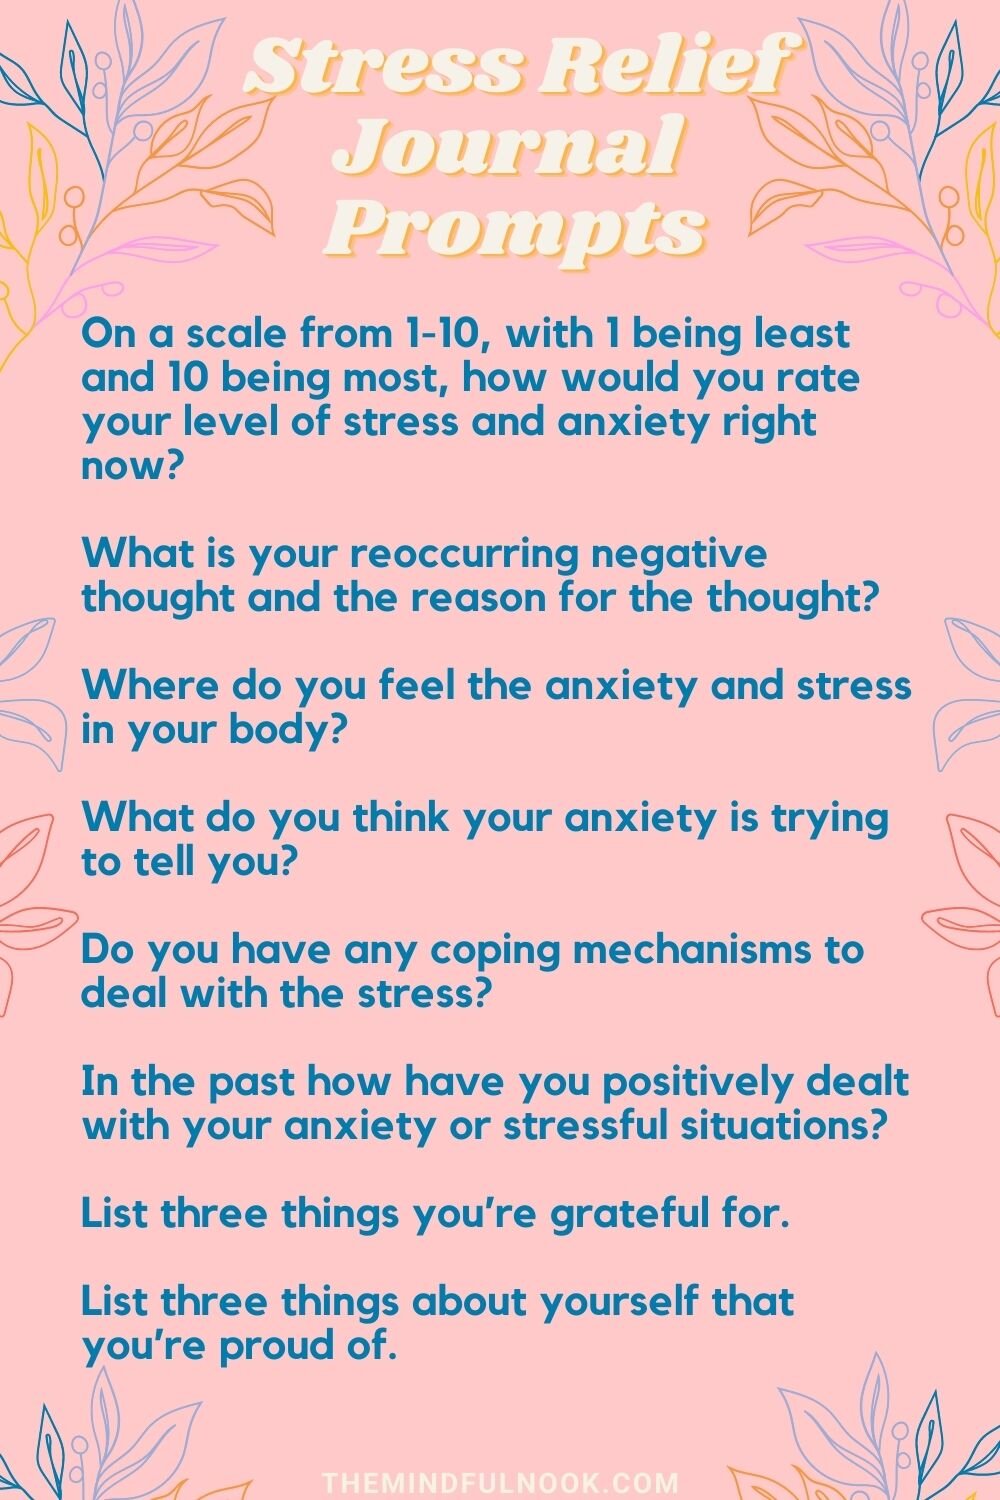 Journal Prompts for Stress Relief_ On a scale from 1-10, with one being least and 10 being most, how would you rate your level of stress and anxiety right now_ What is your reoccurring negative thought and the reason.jpg